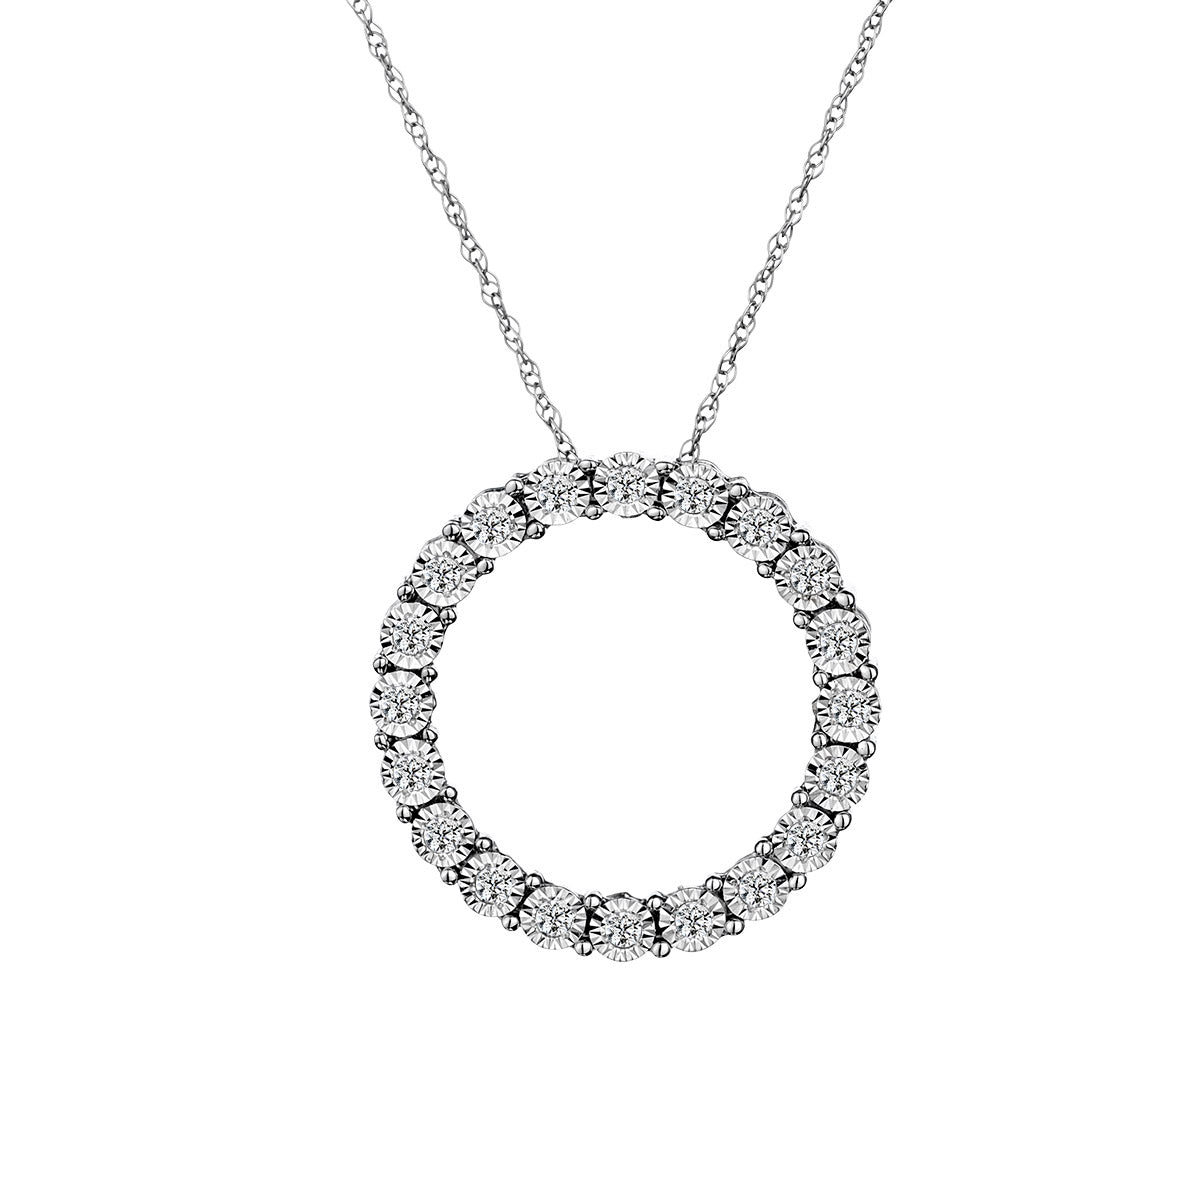 .15 Carat Diamond Circle Pendant,  10kt White Gold. Necklaces and Pendants. Griffin Jewellery Designs.